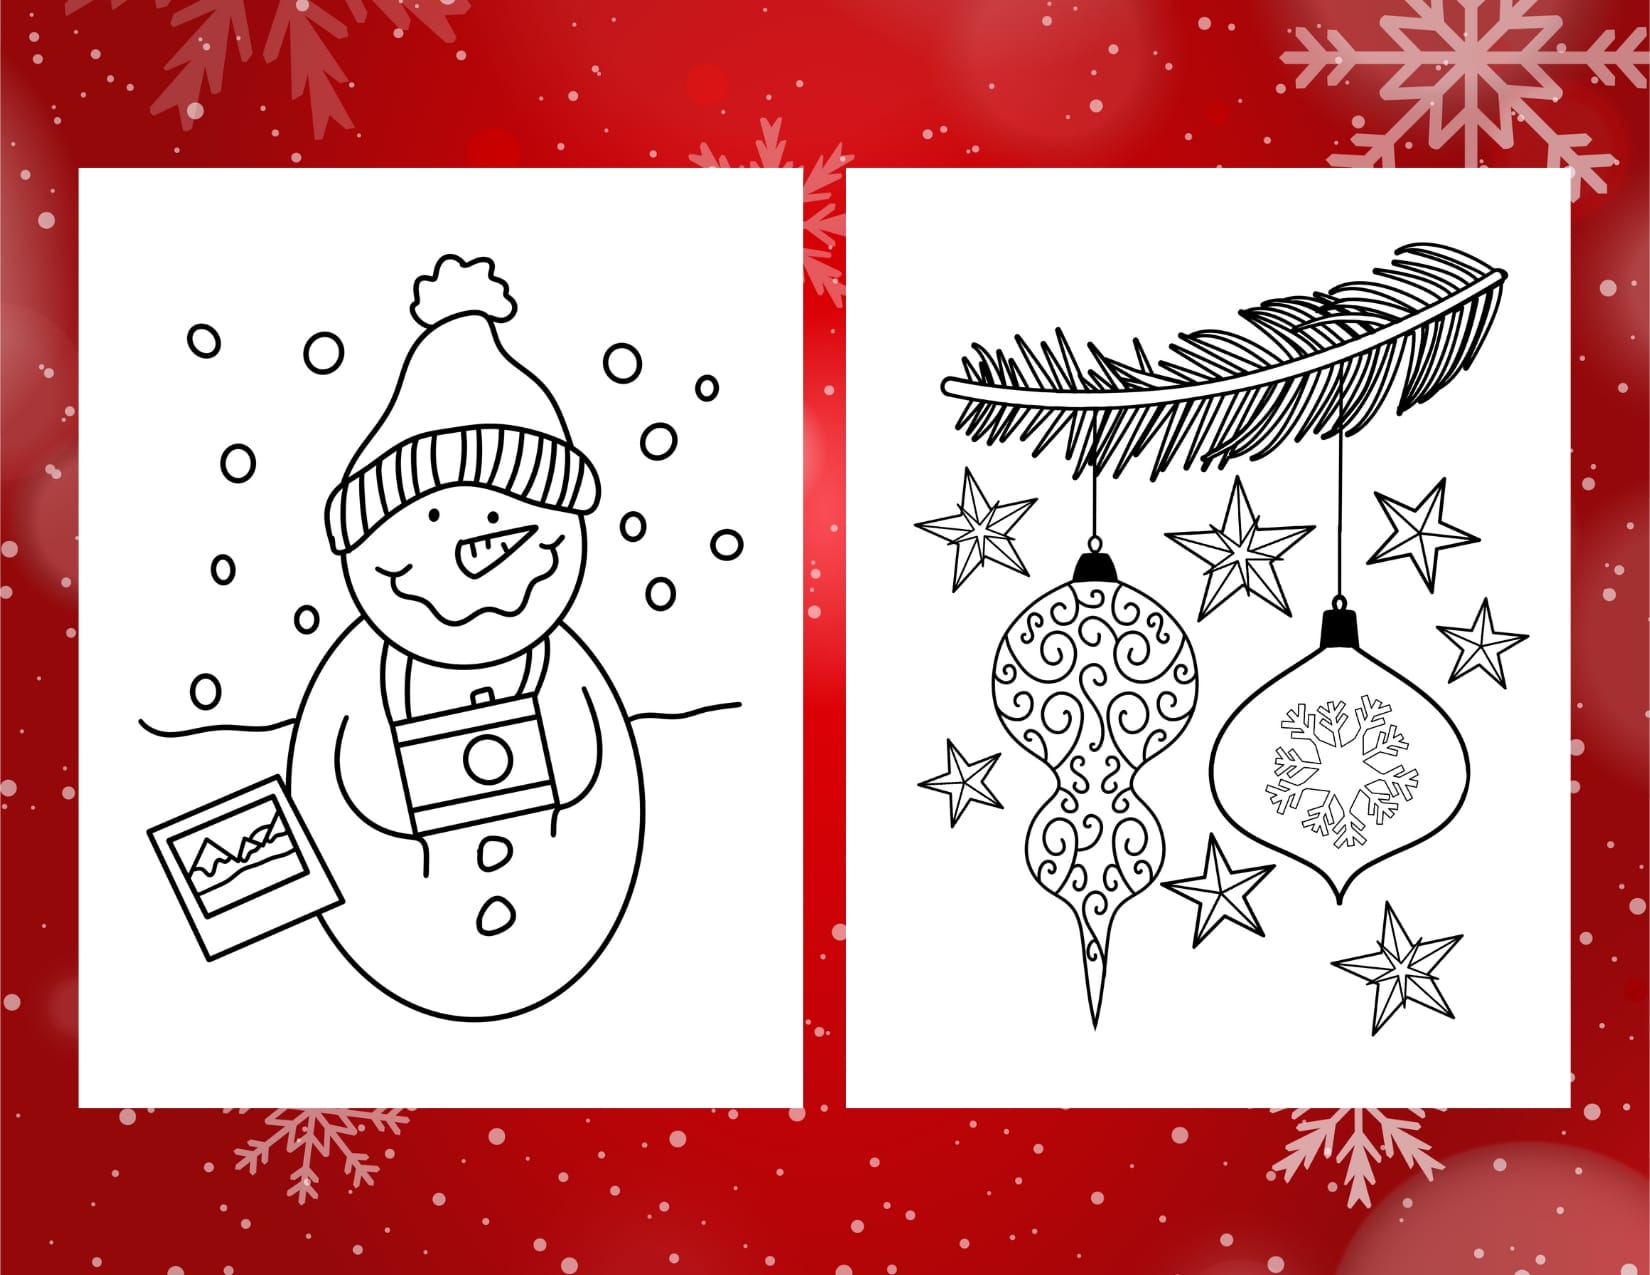 blog graphic showcasing two coloring page printables of a snow man with a camera and ornaments hanging from a tree branch